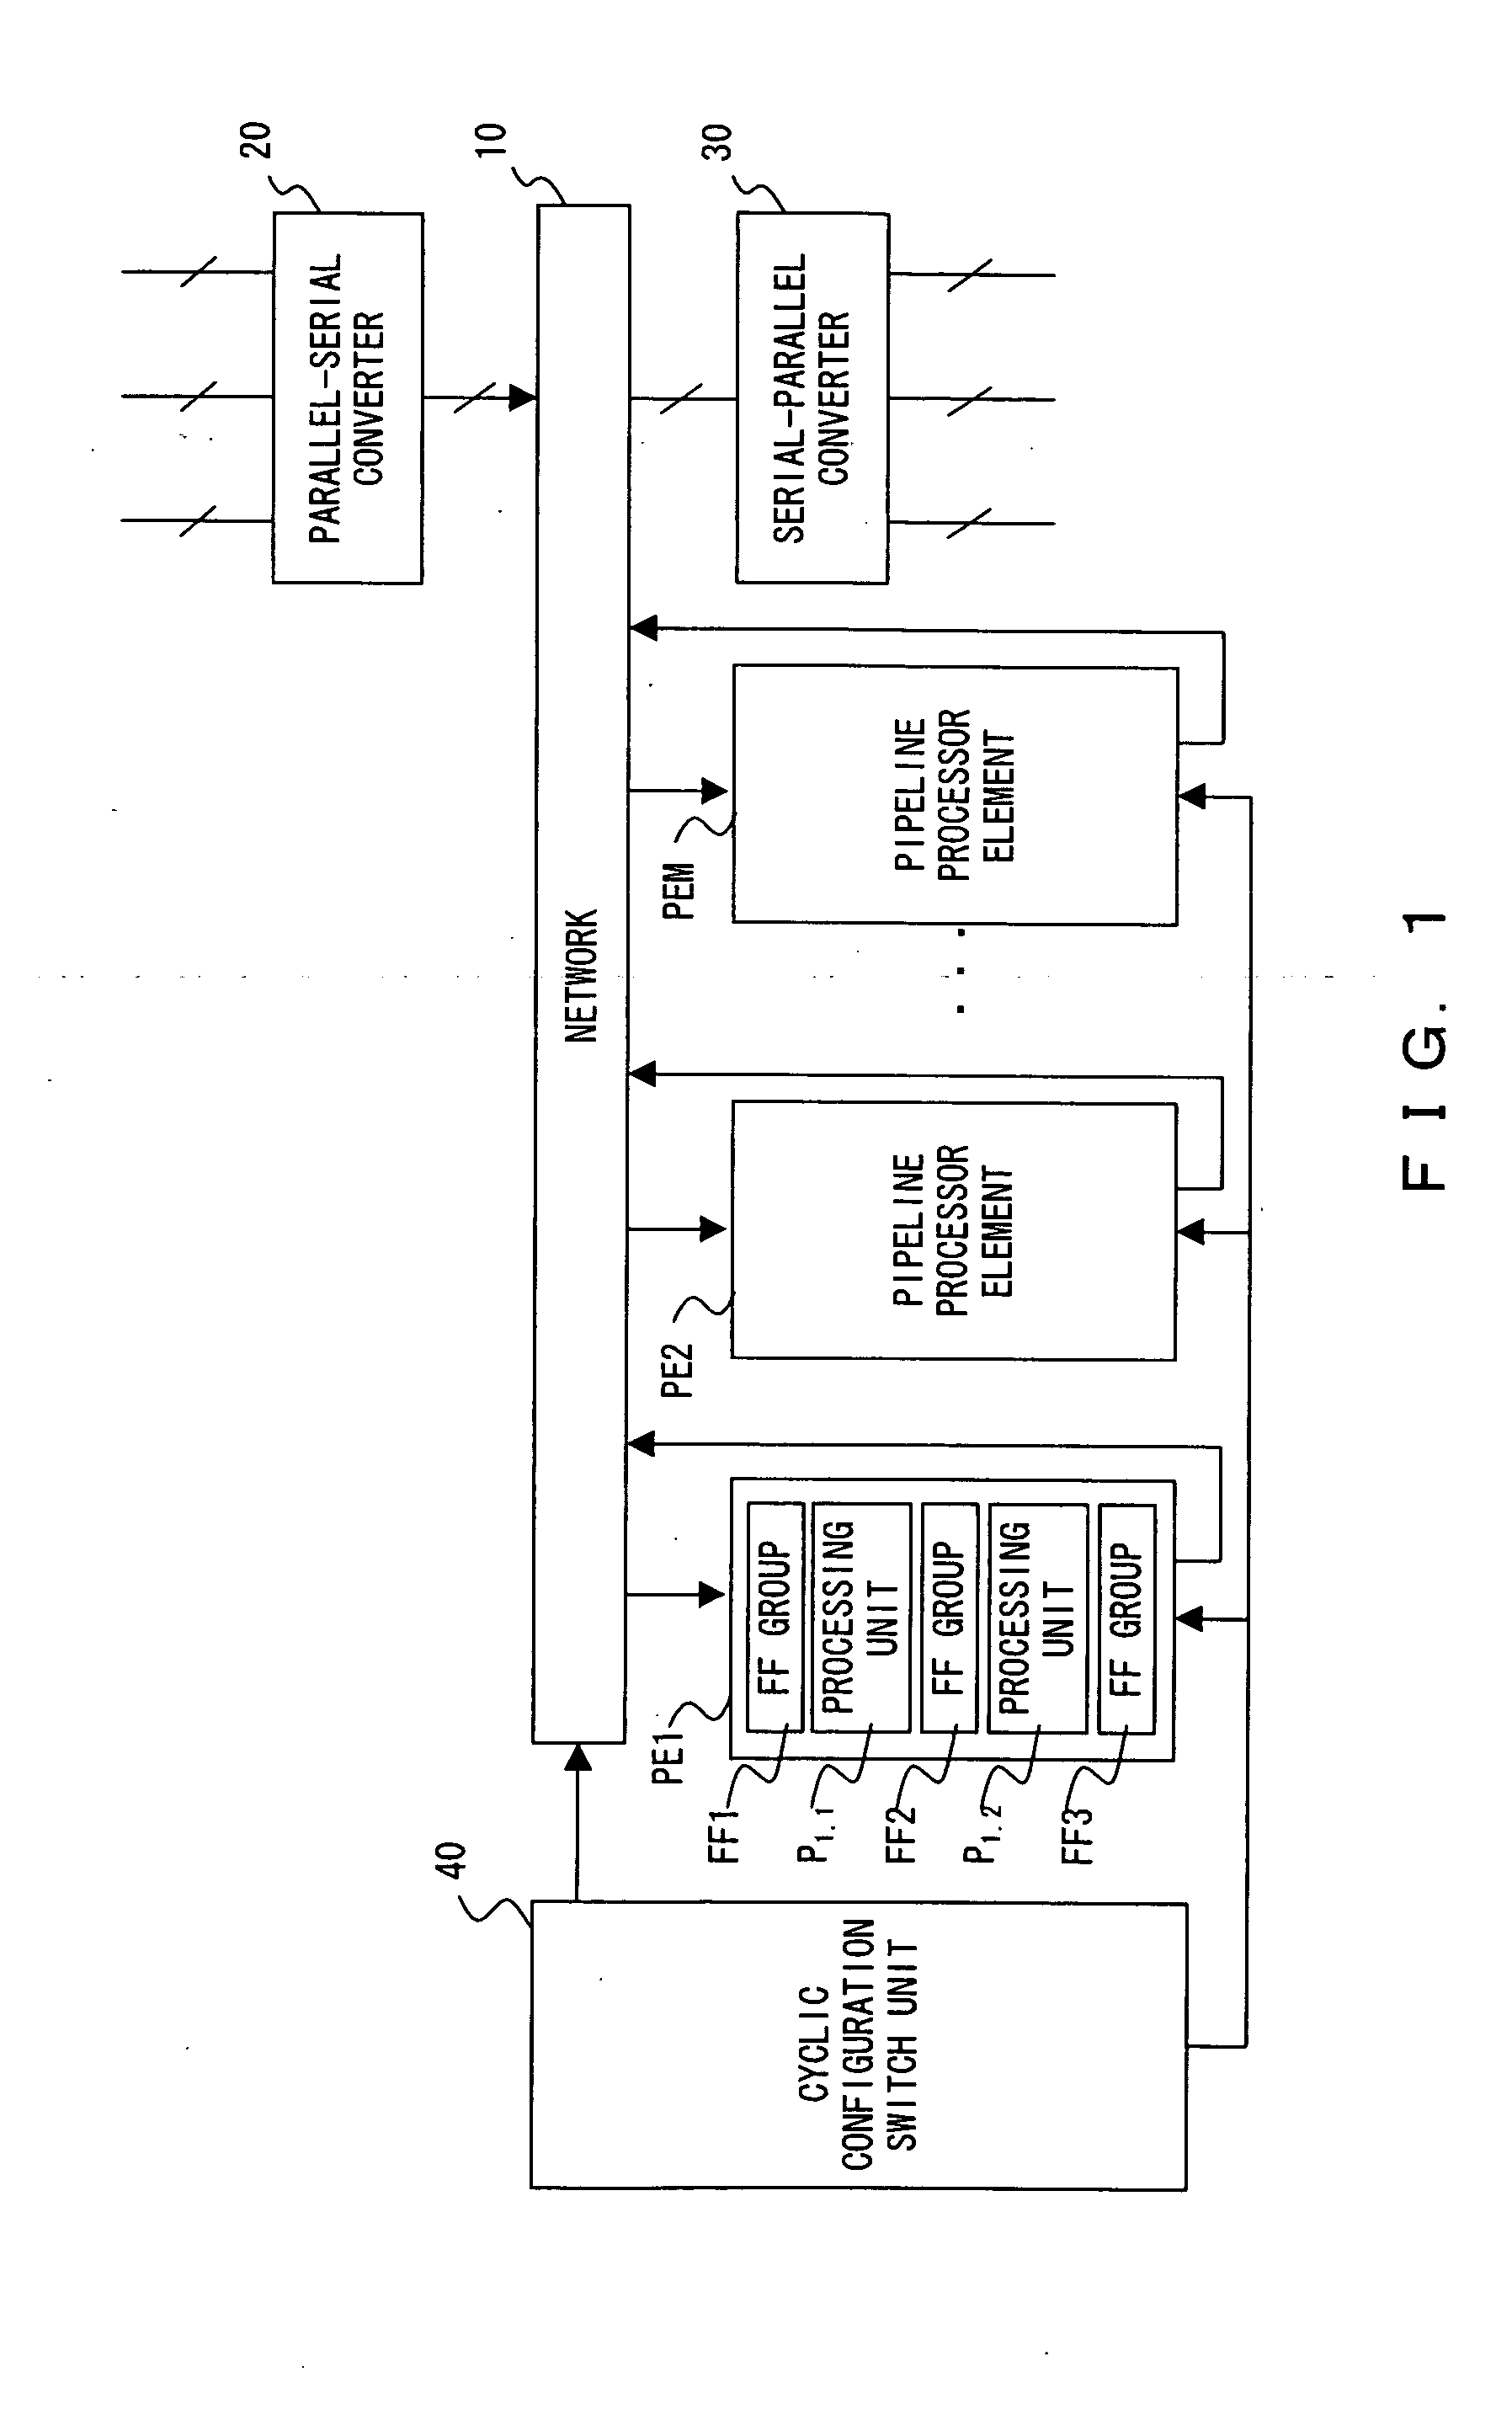 Reconfigurable circuit in which time division multiple processing is possible